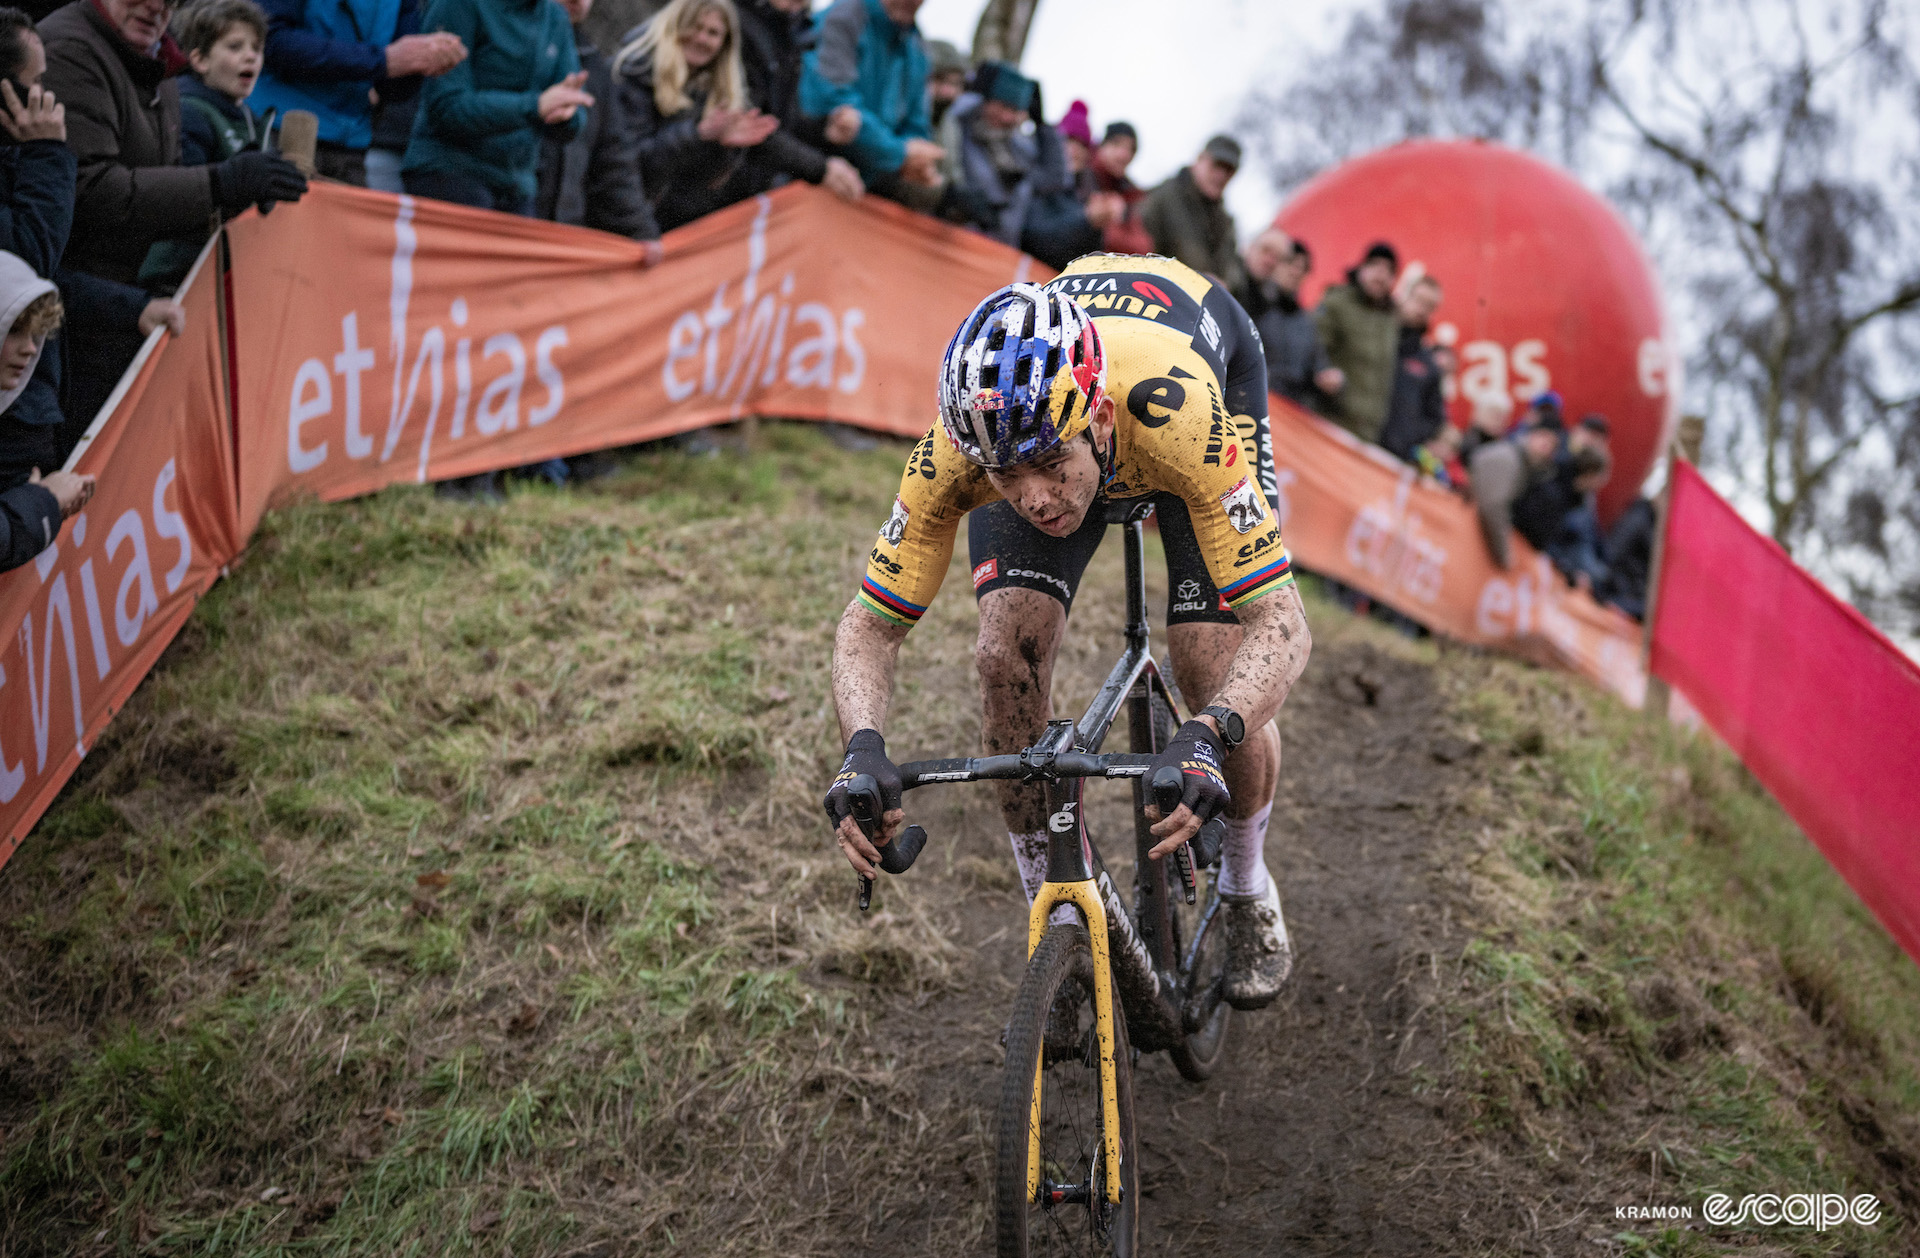 Wout van Aert during CX World Cup Hulst.